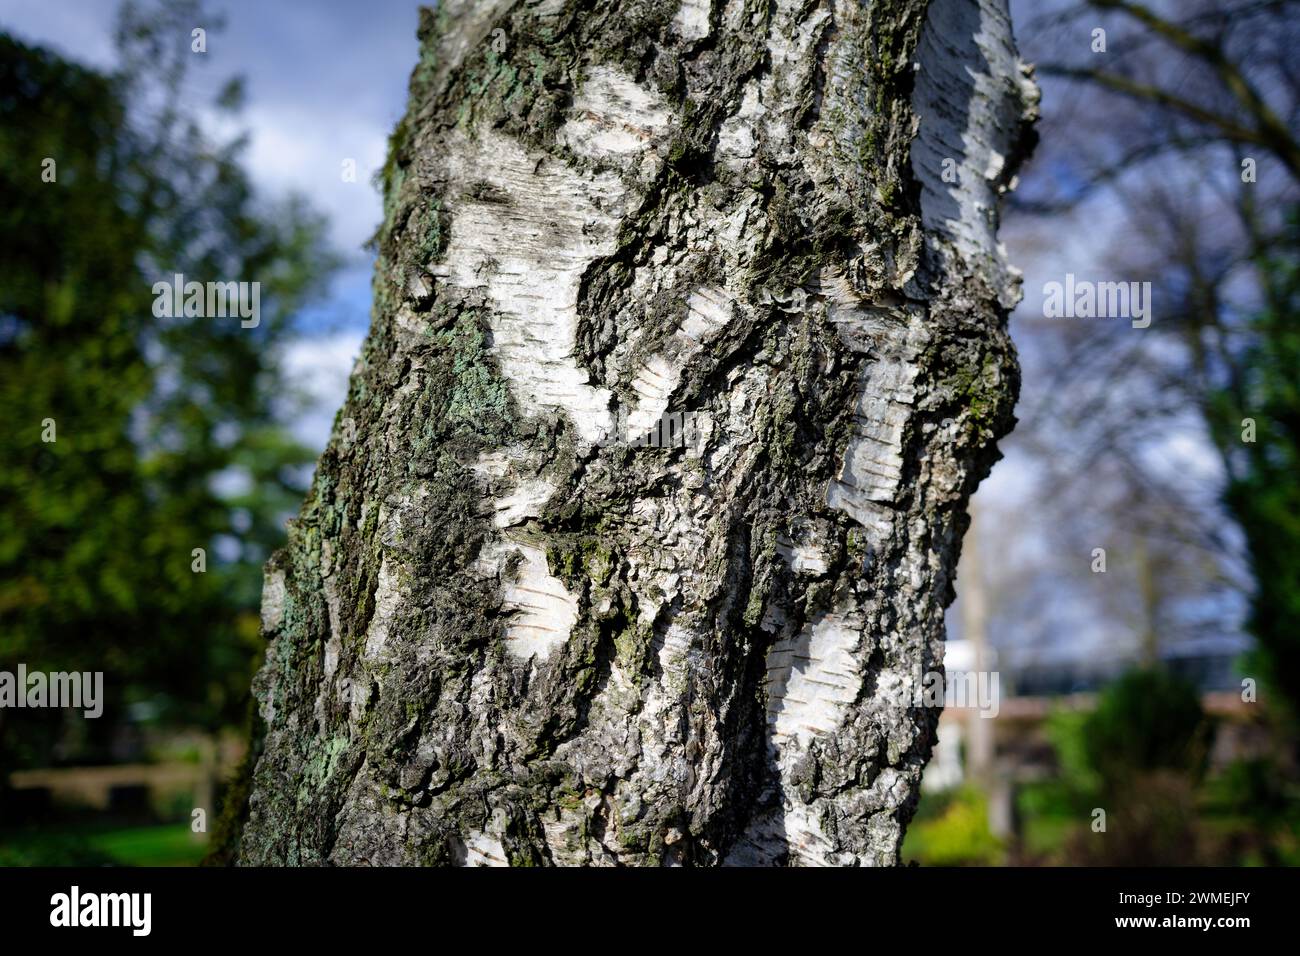 gnarled trunk of an old birch tree in the sunlight in front of a spring-like scenery in the blurred background Stock Photo